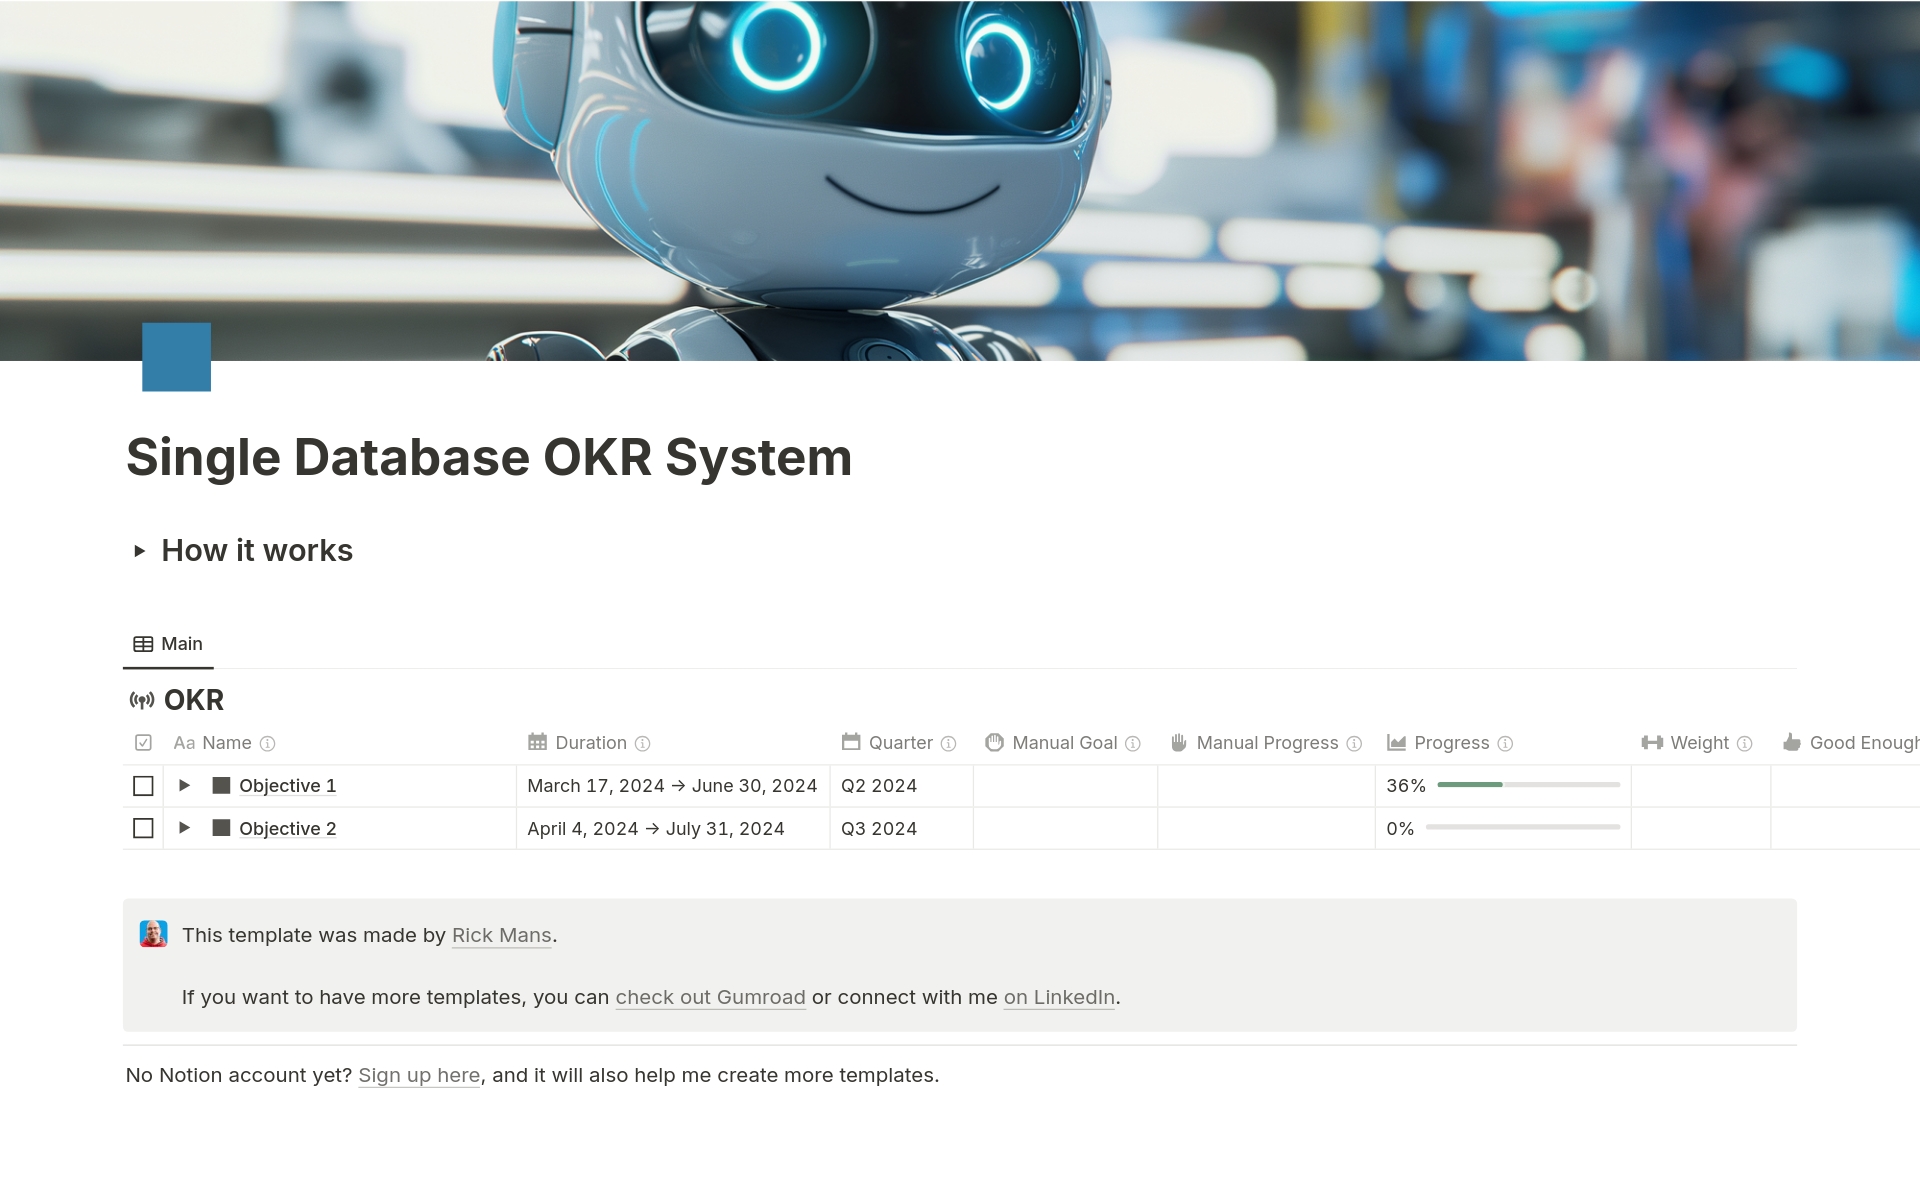 This OKR template is not just another tool; it's a simple approach designed to streamline your planning process, making it both sophisticated and user-friendly. Its simple single-database design and straightforward weighted progress calculation feature set this template apart. 